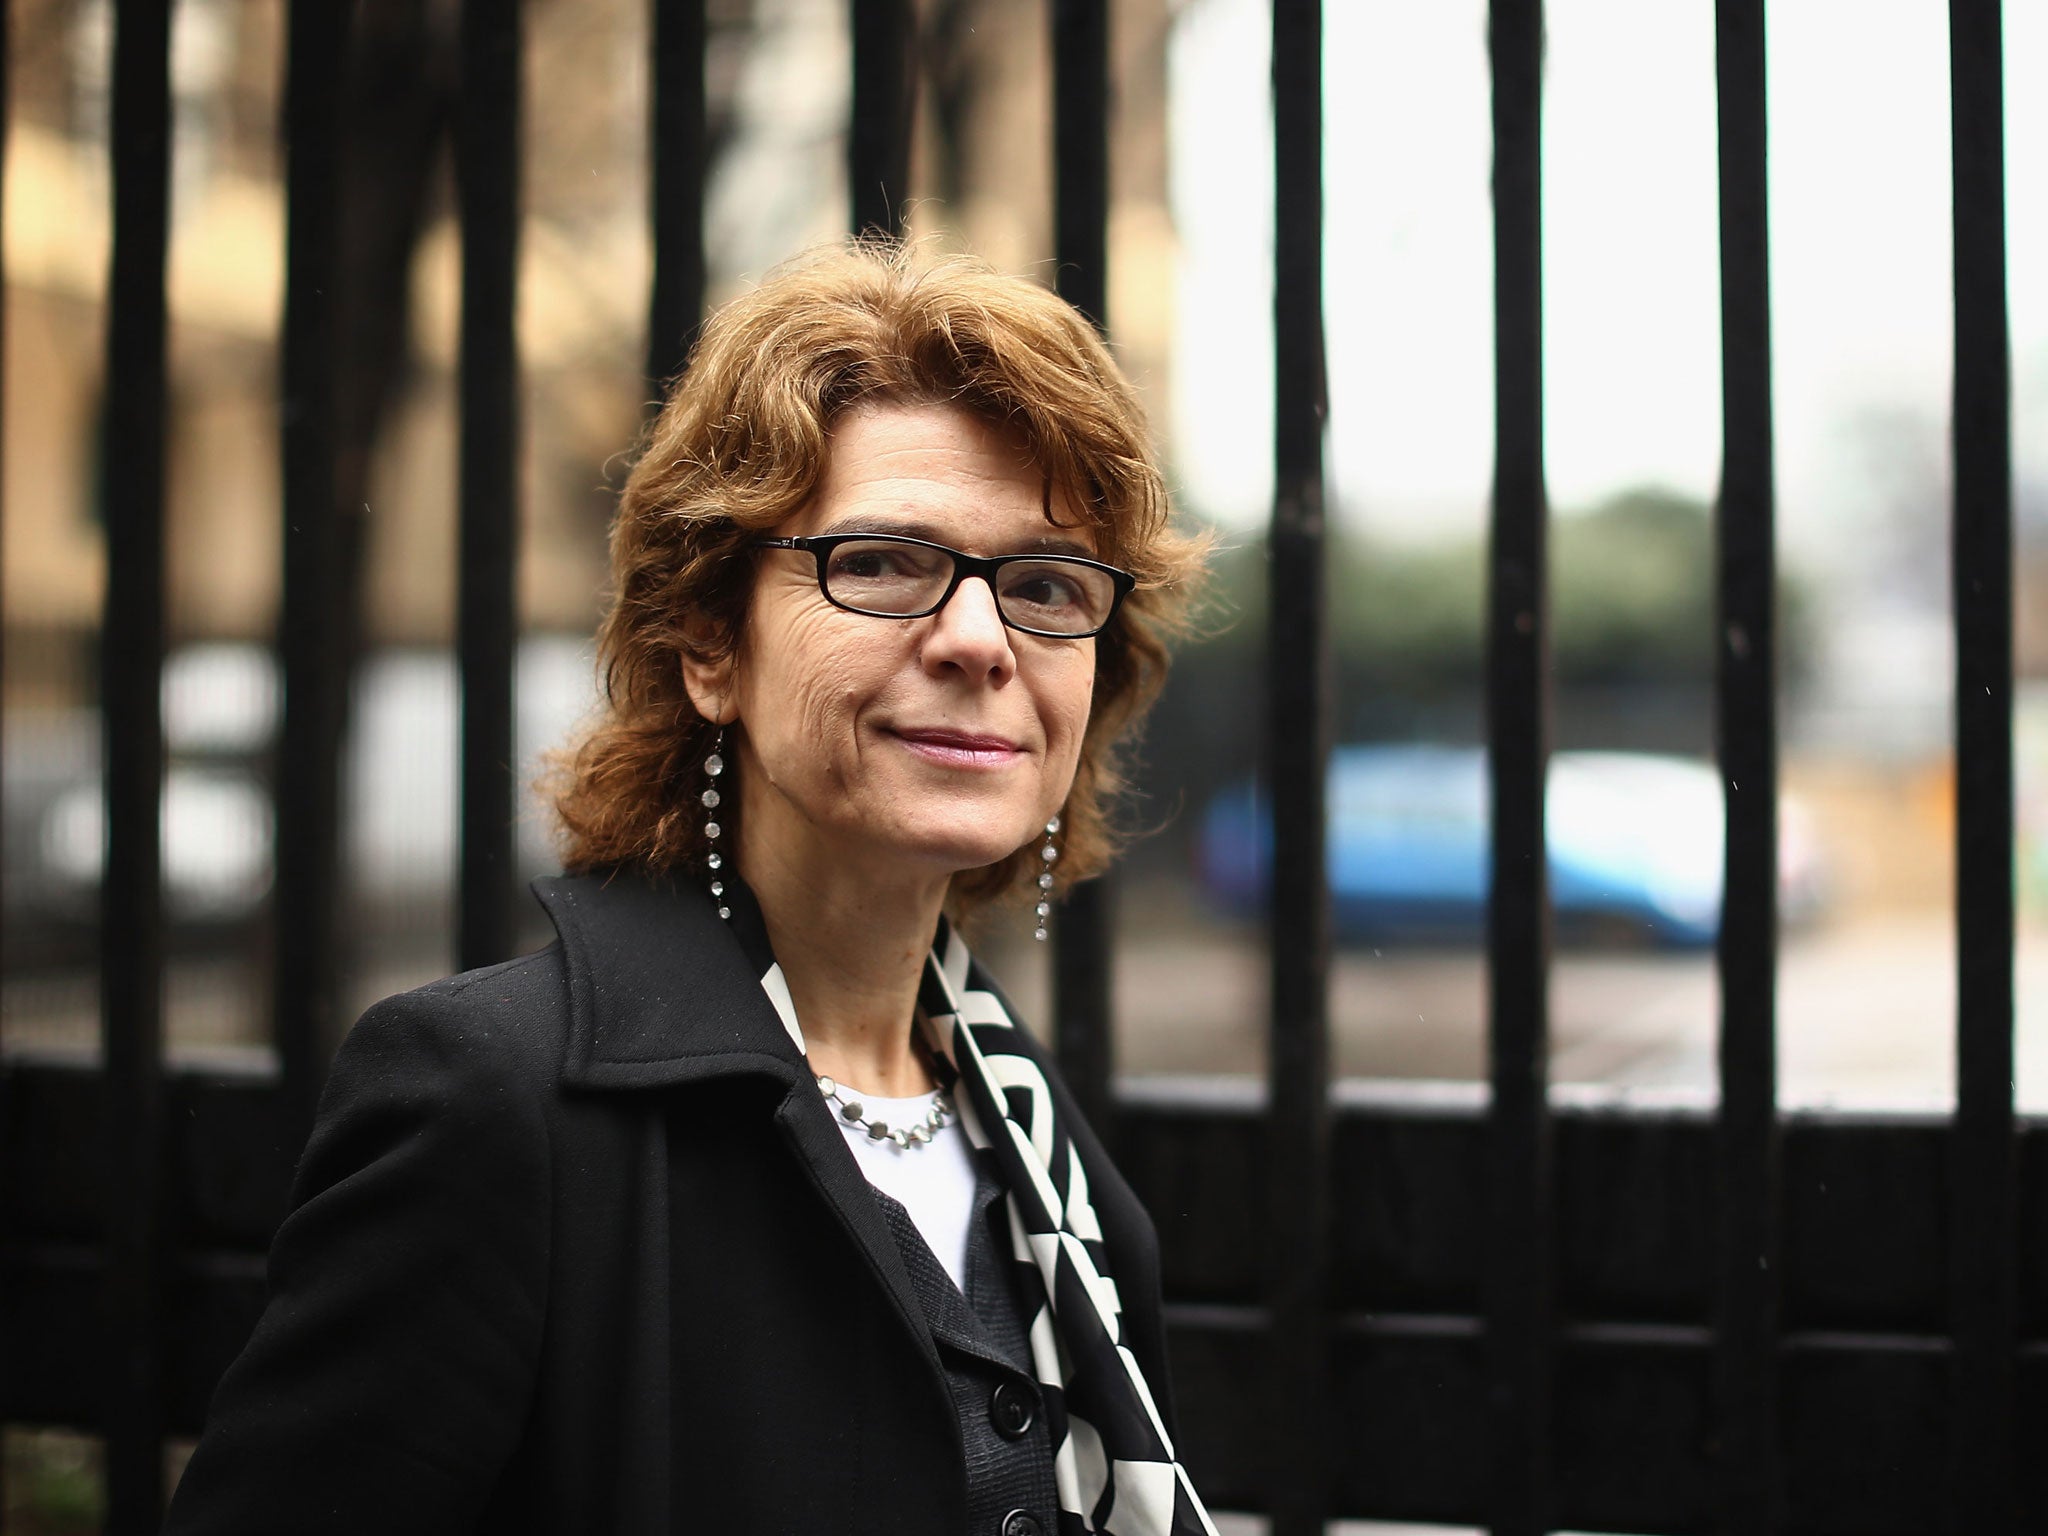 Vicky Pryce, ex-wife of Chris Huhne, arrives at Southwark Crown Court on March 7, 2013 in London, England.